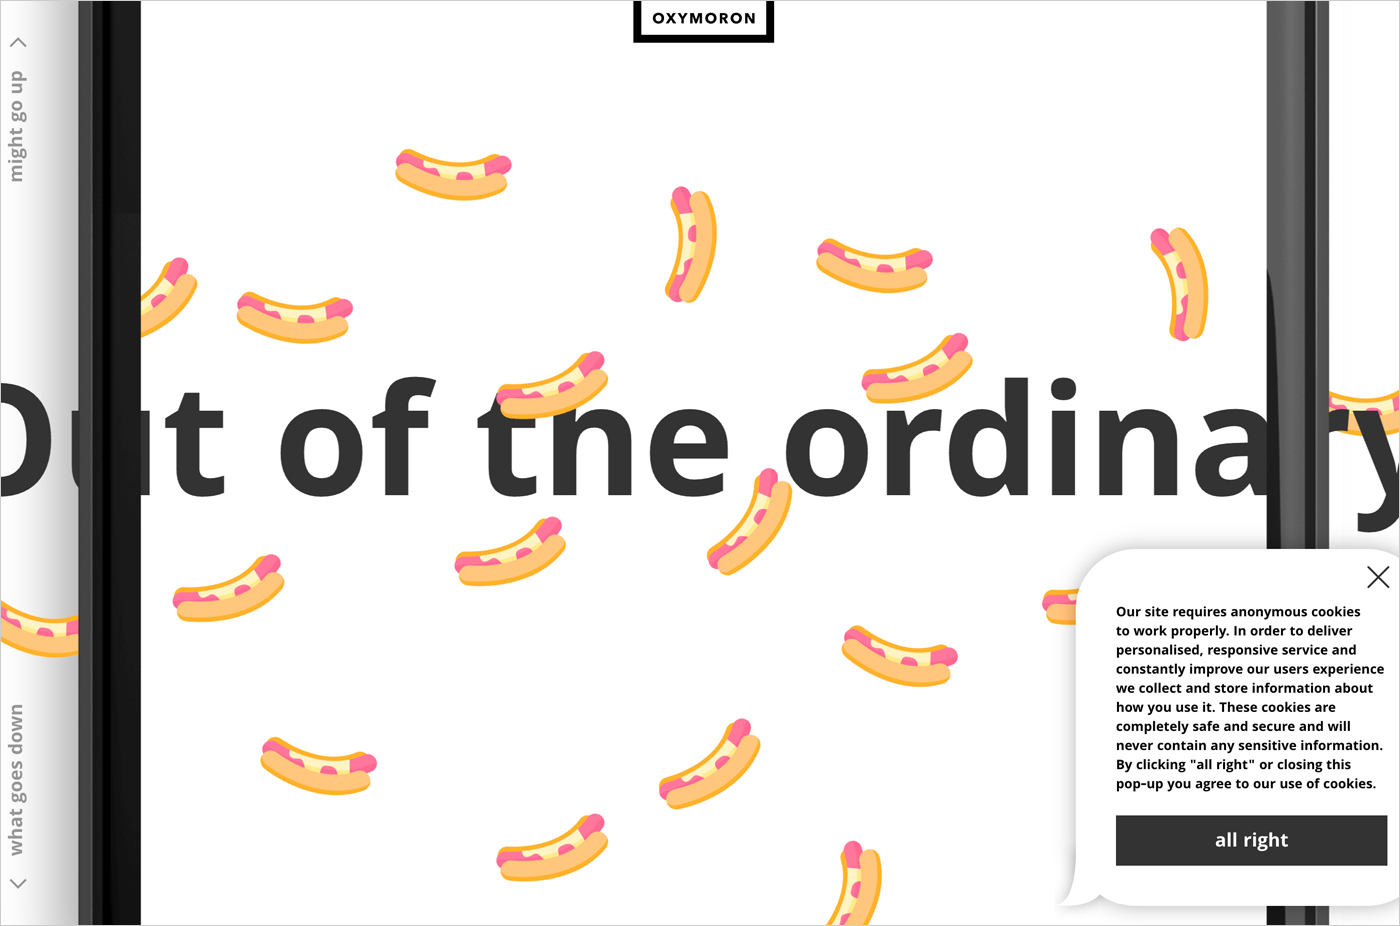 Oxymoron – out of the ordinary creative agencyウェブサイトの画面キャプチャ画像